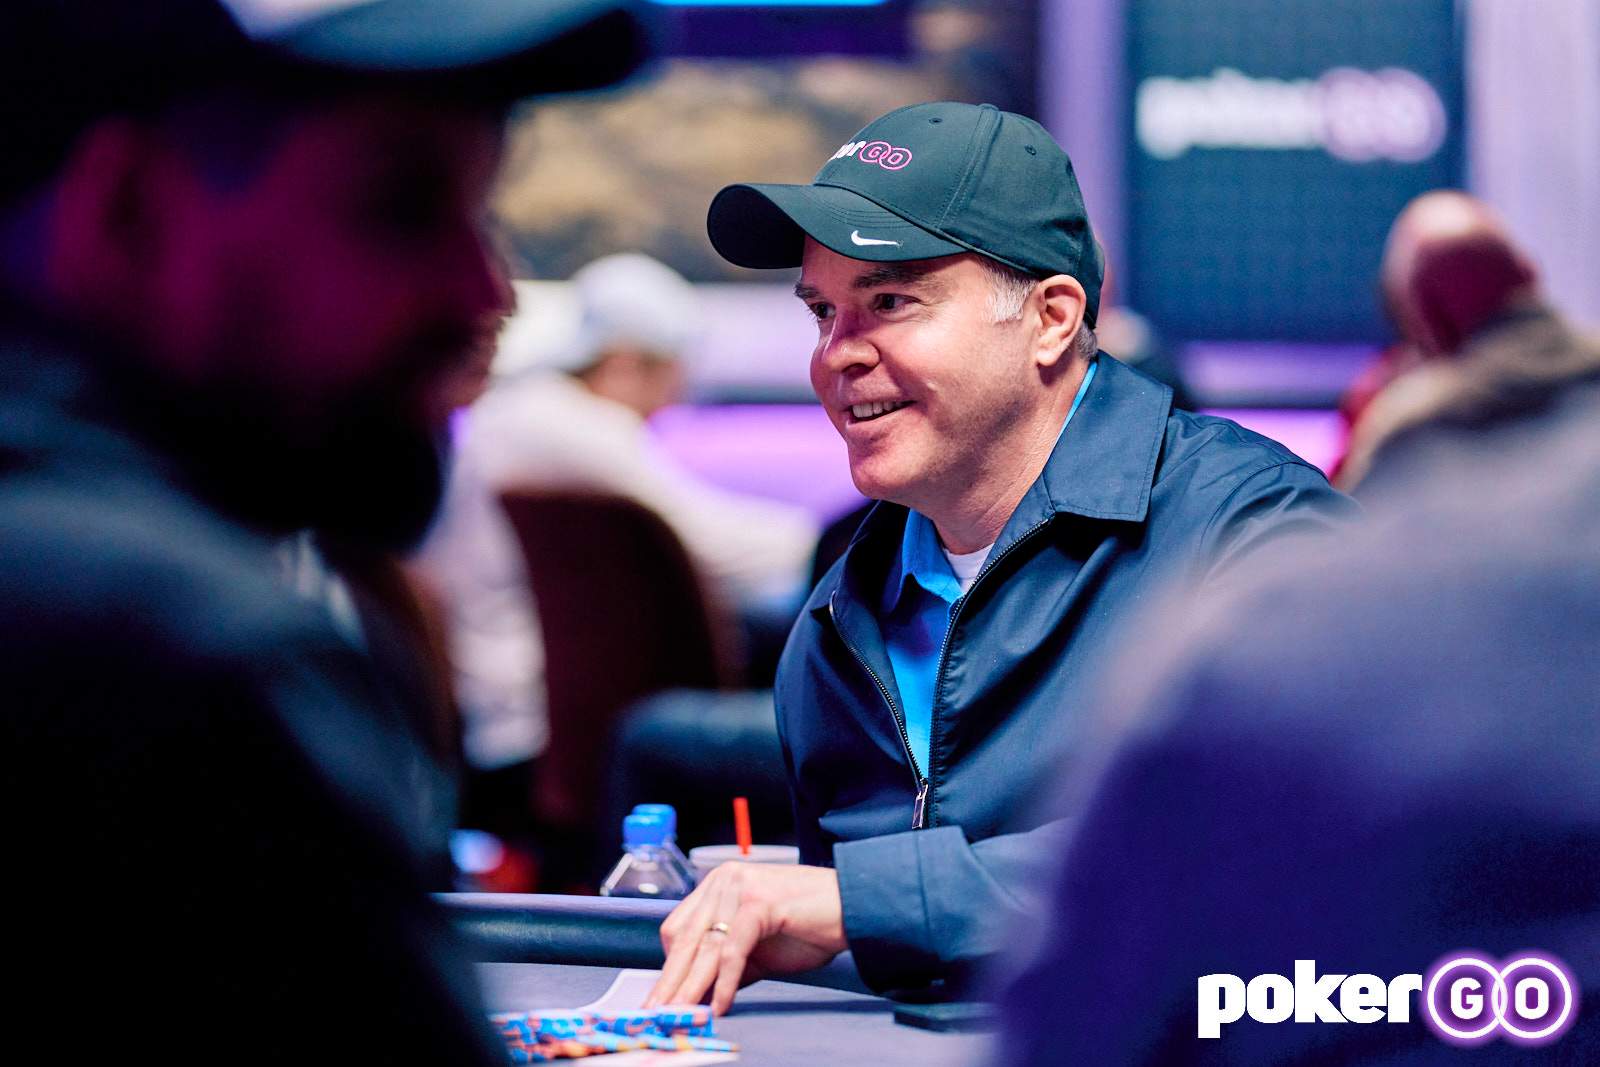 Cary Katz Eyes Top Spot on PokerGO Cup Leaderboard at Event #4 Final Table